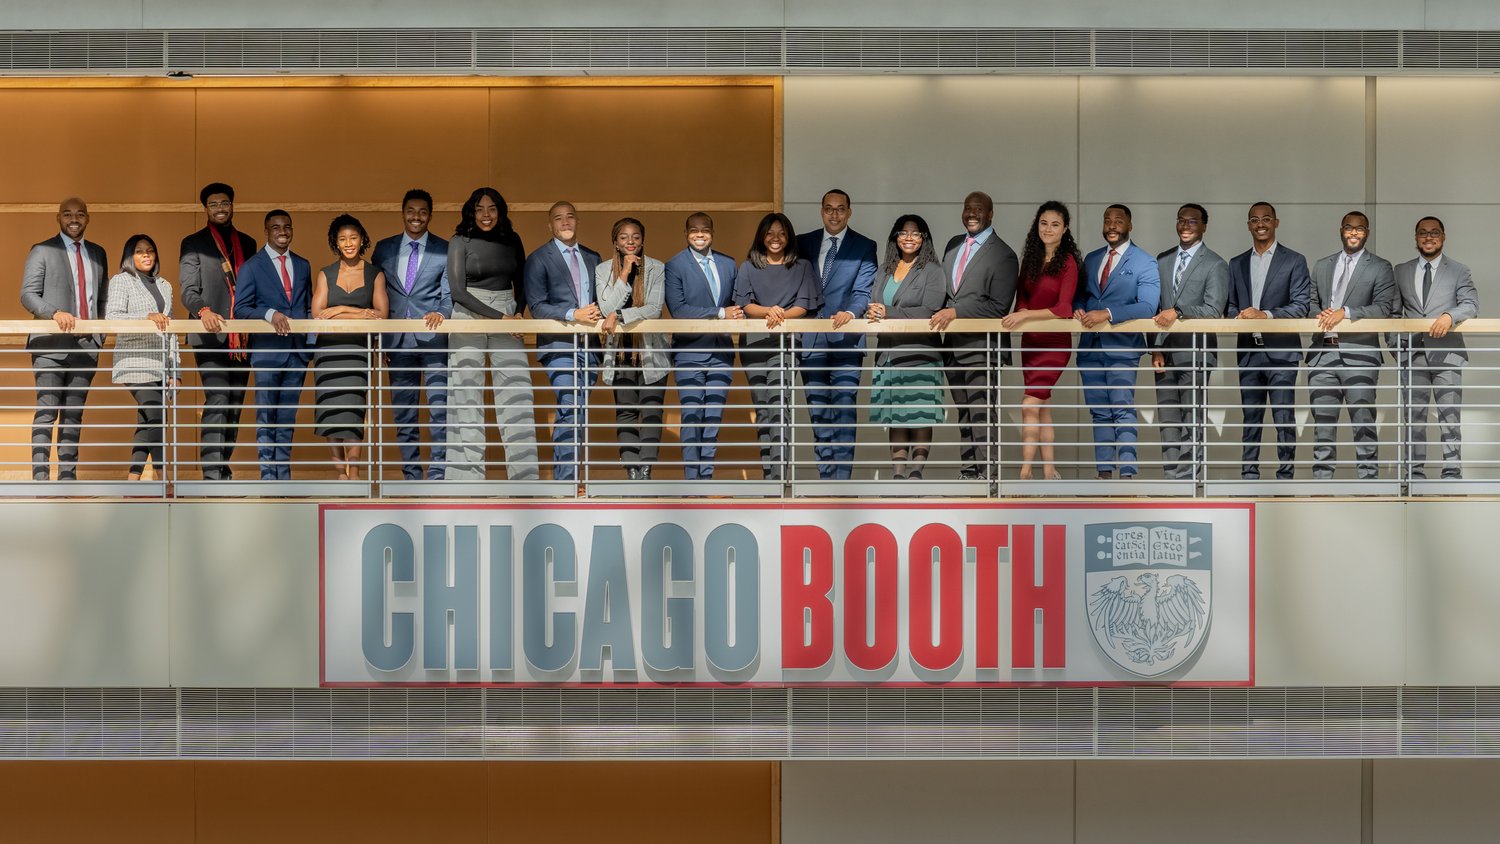 MBA Admissions Tips  mbaMission's Chicago Booth School of